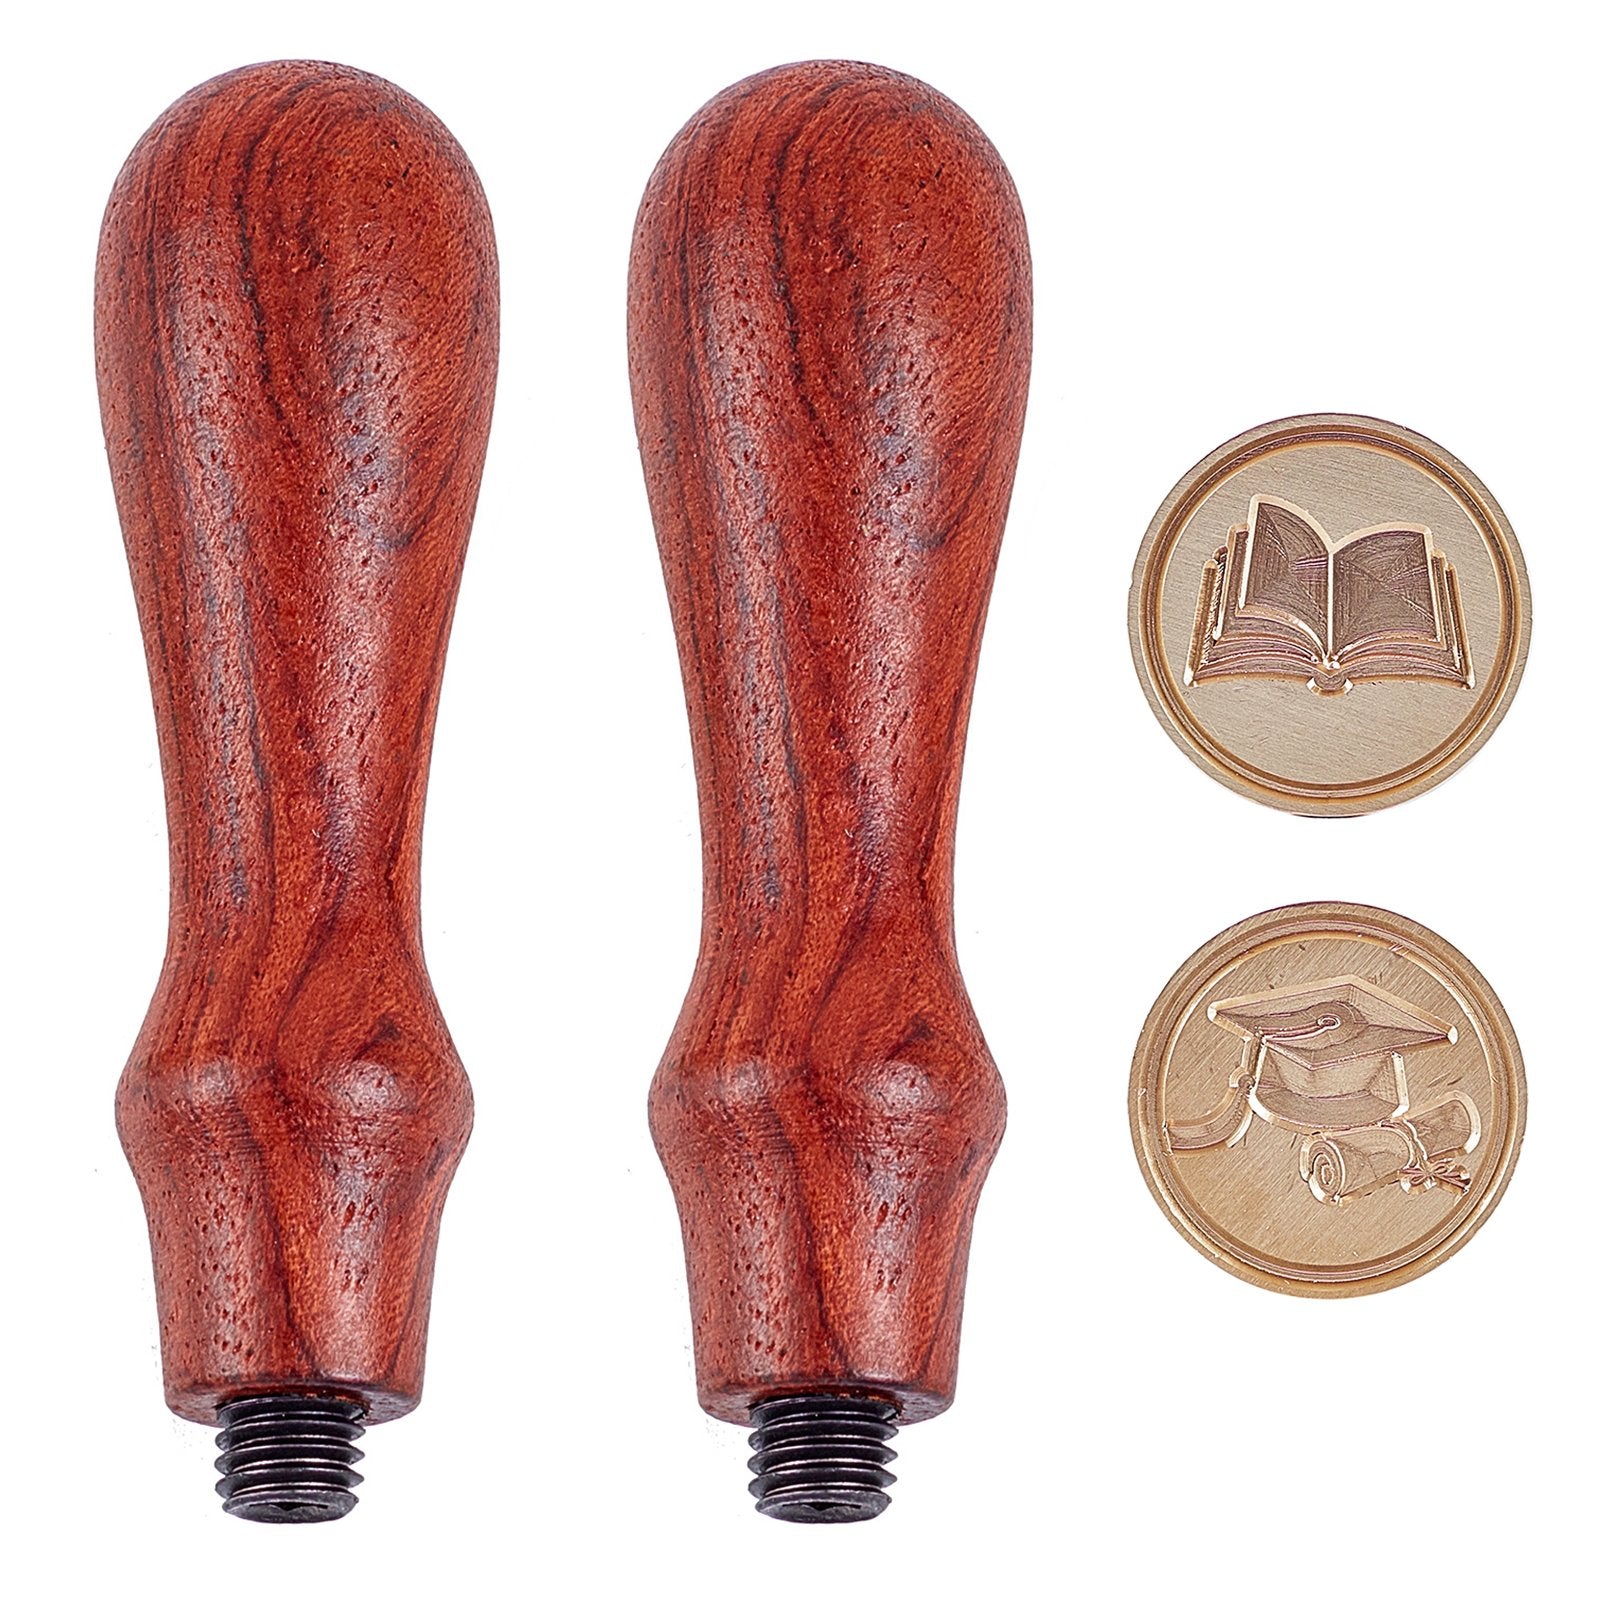 Caps and Books Wax Seal Stamp Set(stamp heads and handles)